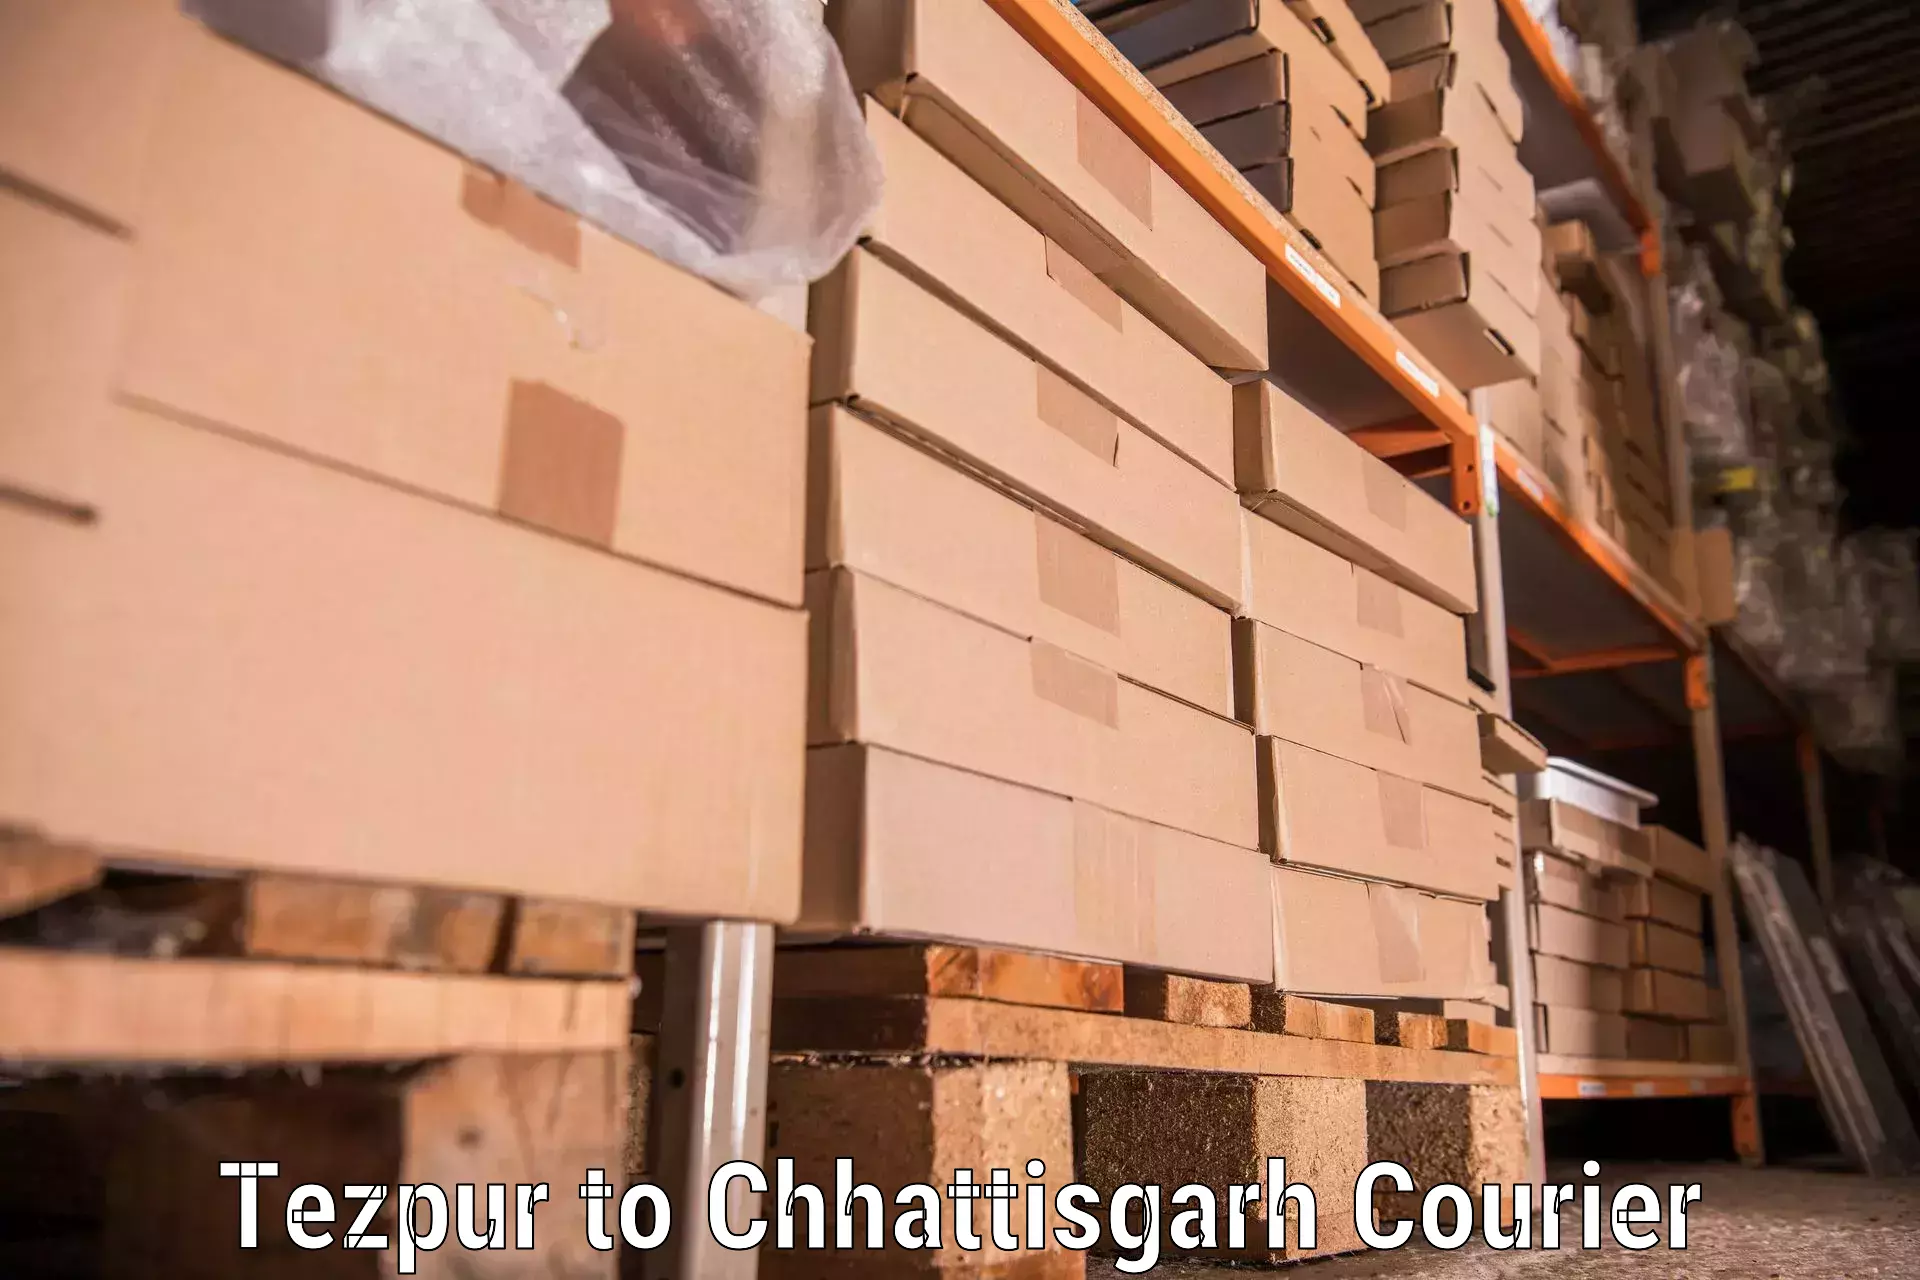 Efficient moving company Tezpur to Surguja